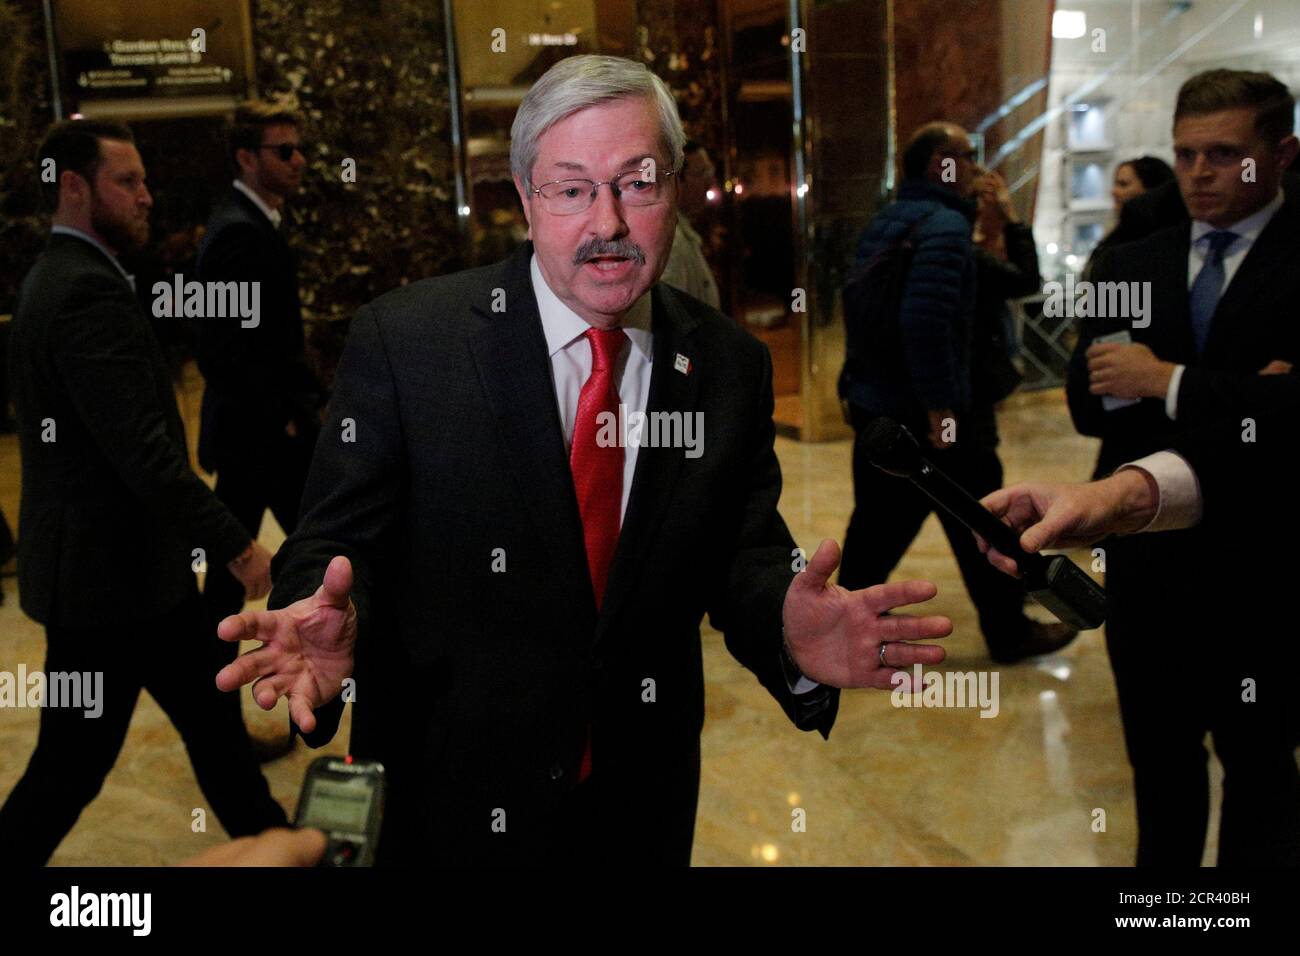 Governor of Iowa Terry Branstad speaks to the press meeting with U.S. President-elect Donald Trump at Trump Tower in Manhattan, New York City, U.S., December 6, 2016.  REUTERS/Brendan McDermid Stock Photo